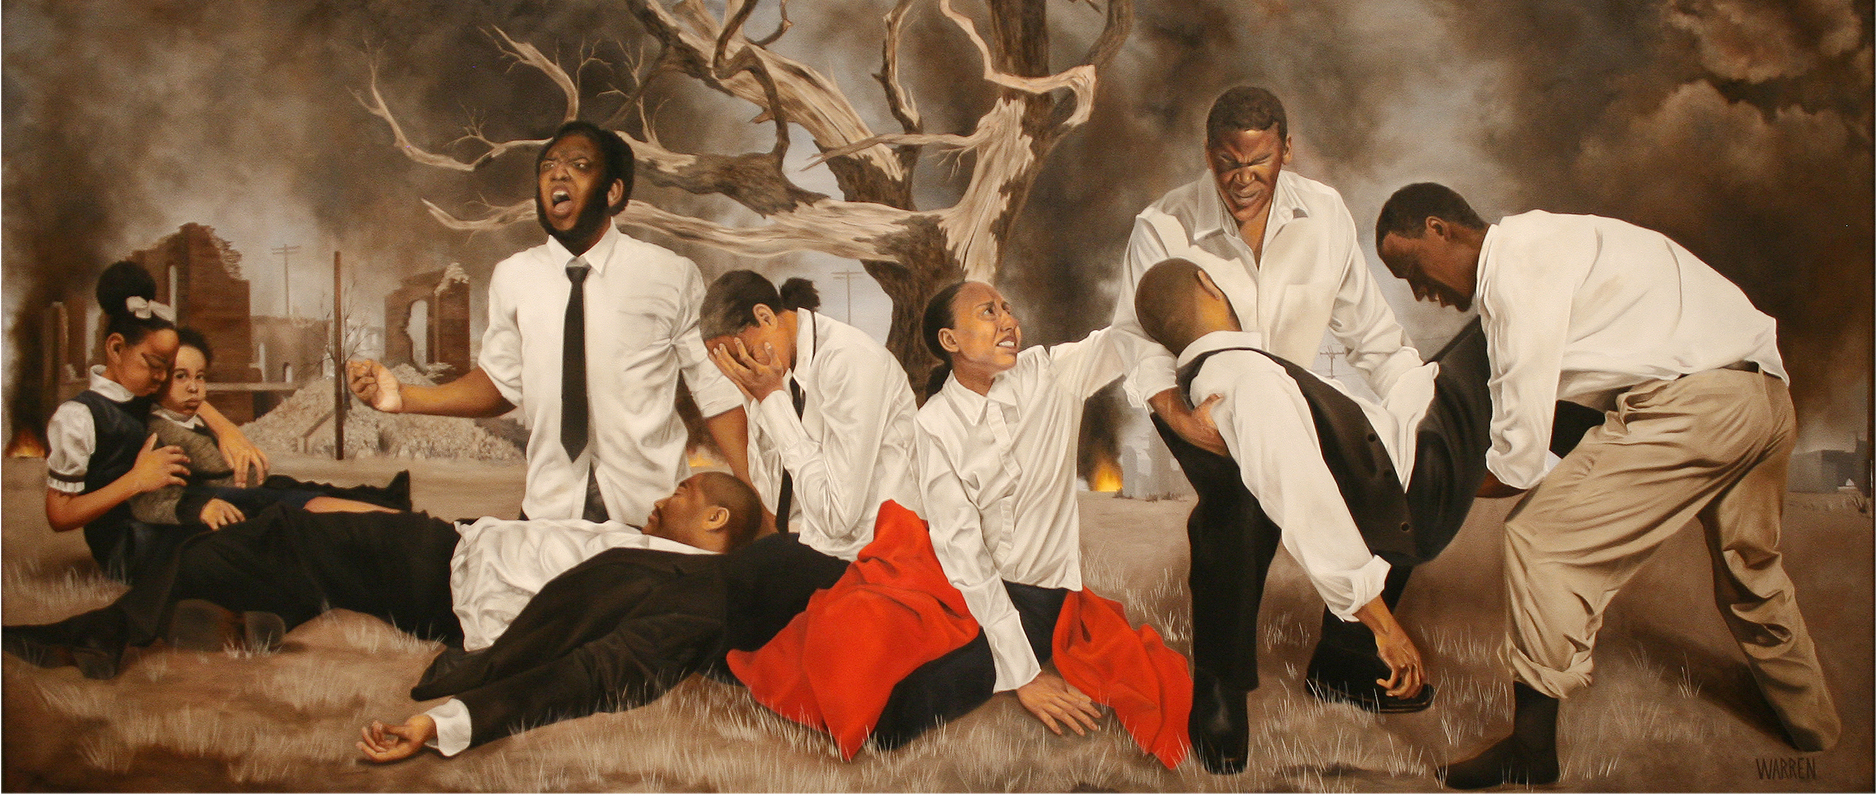 Narrative paintings - Shawn Michael Warren, "In a Promised Land"